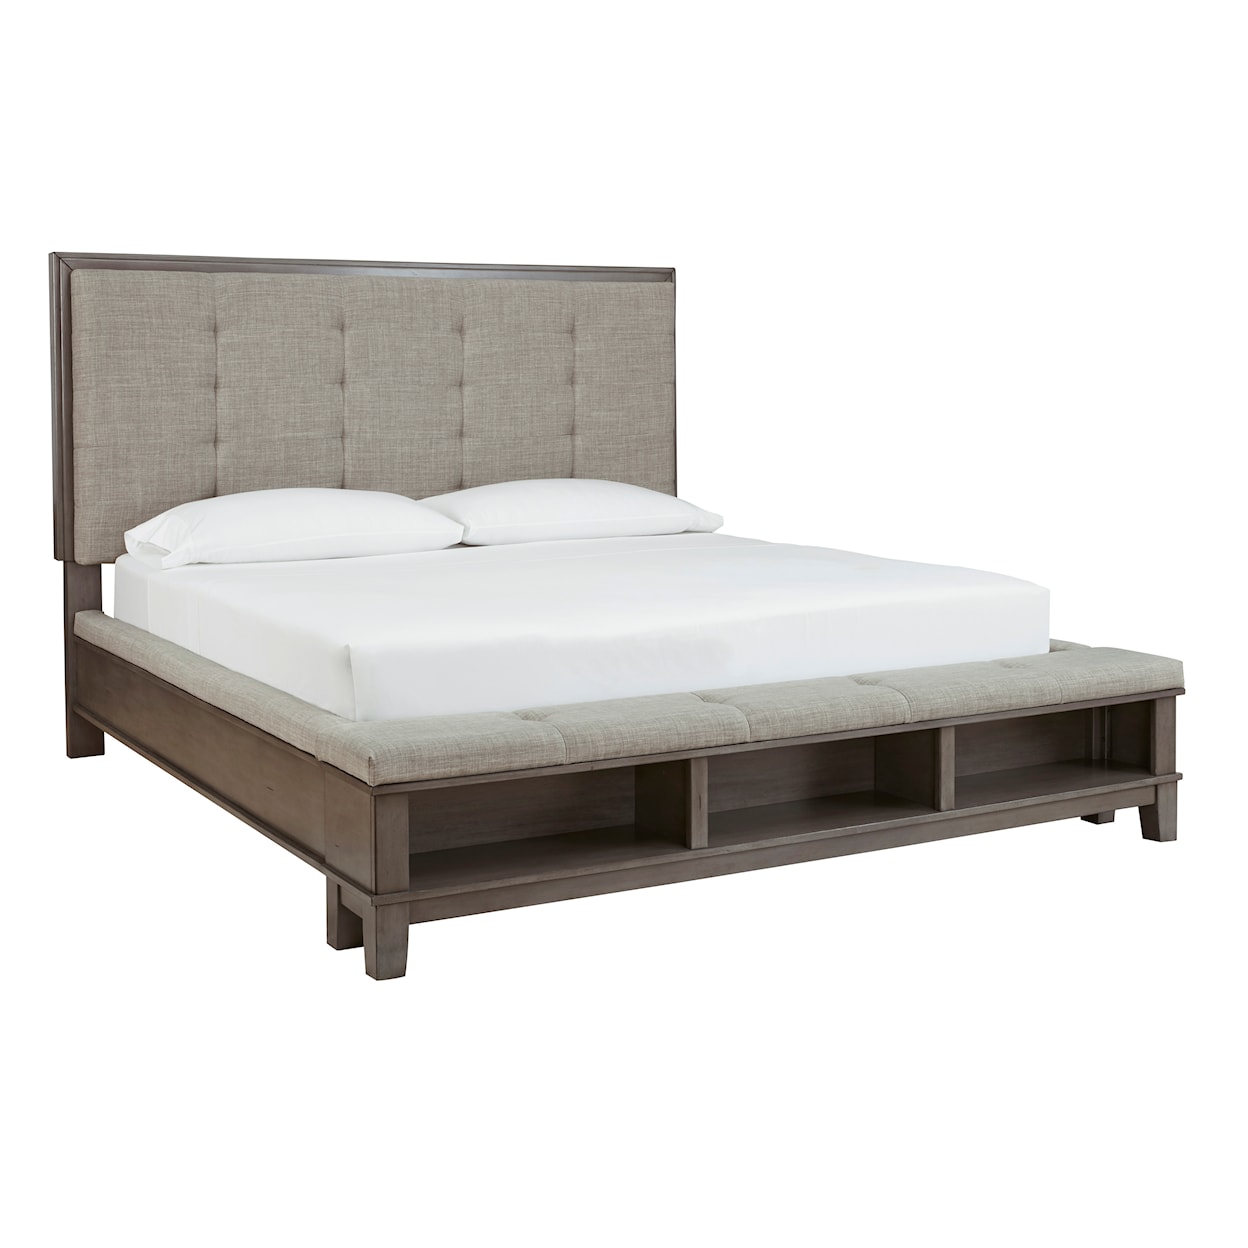 Benchcraft Hannah California King Panel Bed with Storage